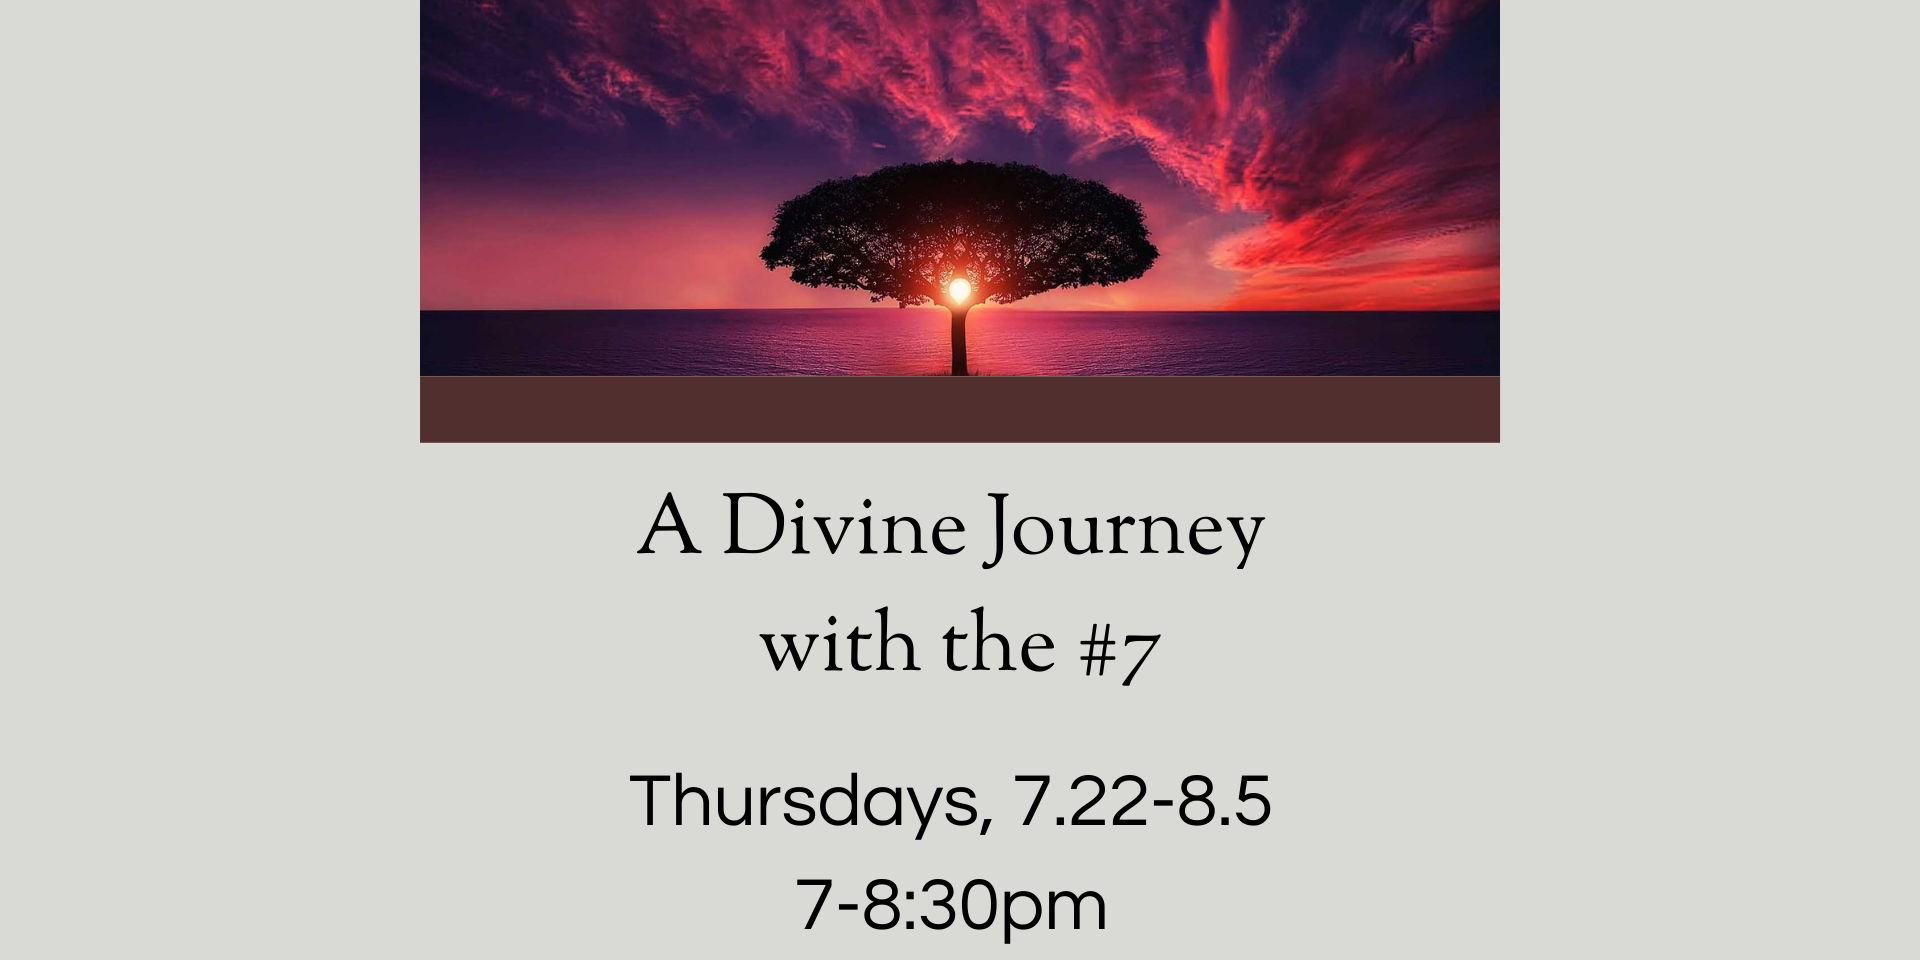 A Divine Journey with the # 7 promotional image